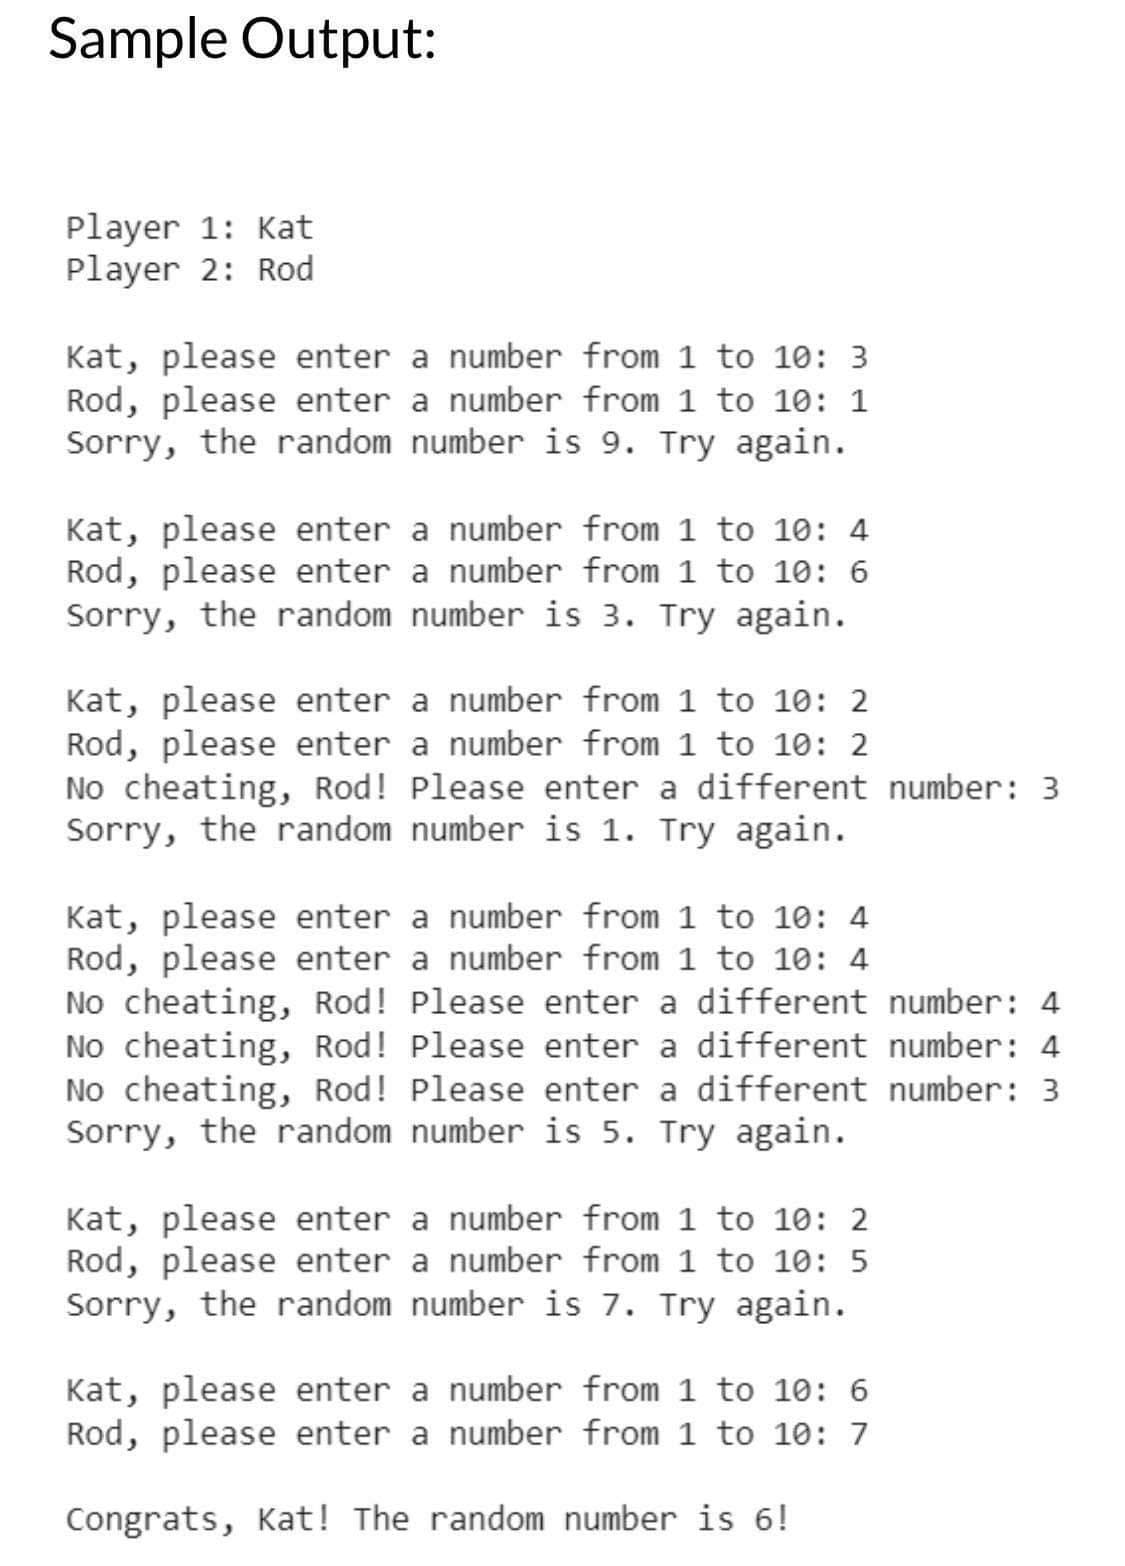 Sample Output:
Player 1: Kat
Player 2: Rod
Kat, please enter a number from 1 to 10: 3
Rod, please enter a number from 1 to 10: 1
Sorry, the random number is 9. Try again.
Kat, please enter a number from 1 to 10:4
Rod, please enter a number from 1 to 10: 6
Sorry, the random number is 3. Try again.
Kat, please enter a number from 1 to 10: 2
Rod, please enter a number from 1 to 10: 2
No cheating, Rod! Please enter a different number: 3
Sorry, the random number is 1. Try again.
Kat, please enter a number from 1 to 10: 4
Rod, please enter a number from 1 to 10: 4
No cheating, Rod! Please enter a different number: 4
No cheating, Rod! Please enter a different number: 4
No cheating, Rod! Please enter a different number: 3
Sorry, the random number is 5. Try again.
Kat, please enter a number from 1 to 10: 2
Rod, please enter a number from 1 to 10: 5
Sorry, the random number is 7. Try again.
Kat, please enter a number from 1 to 10: 6
Rod, please enter a number from 1 to 10: 7
Congrats, Kat! The random number is 6!